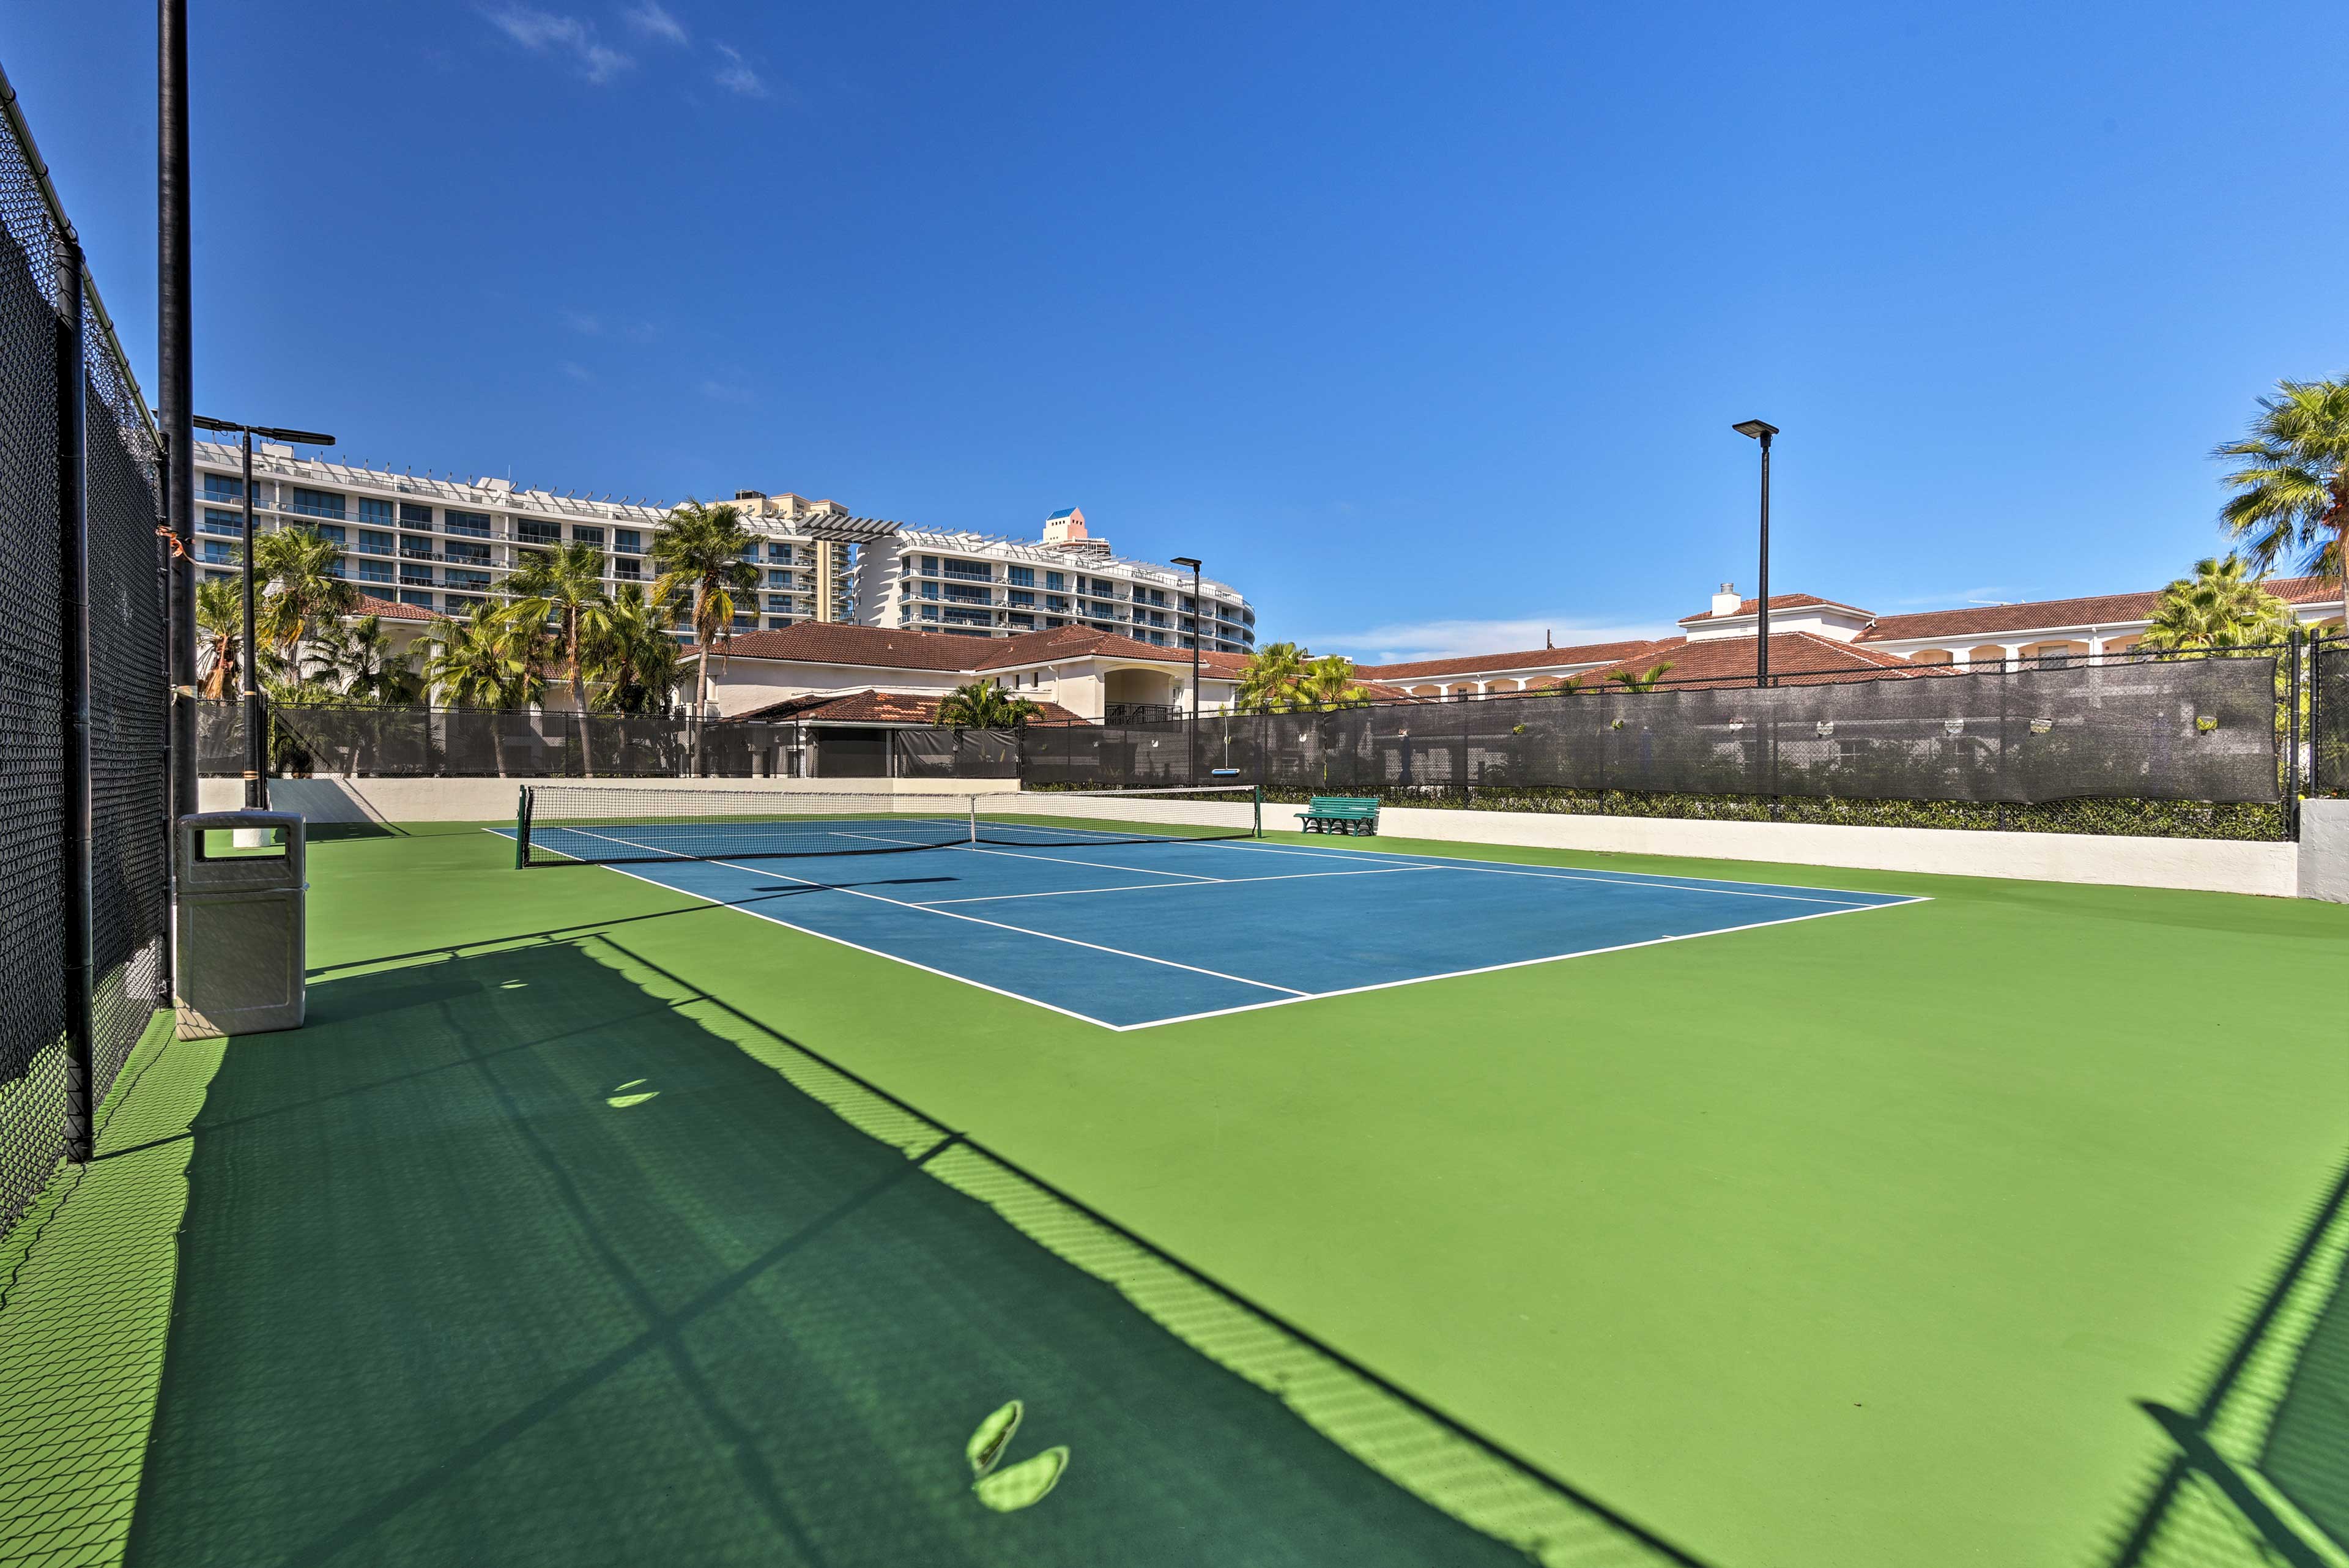 Work up a sweat on the tennis courts with friends and family.